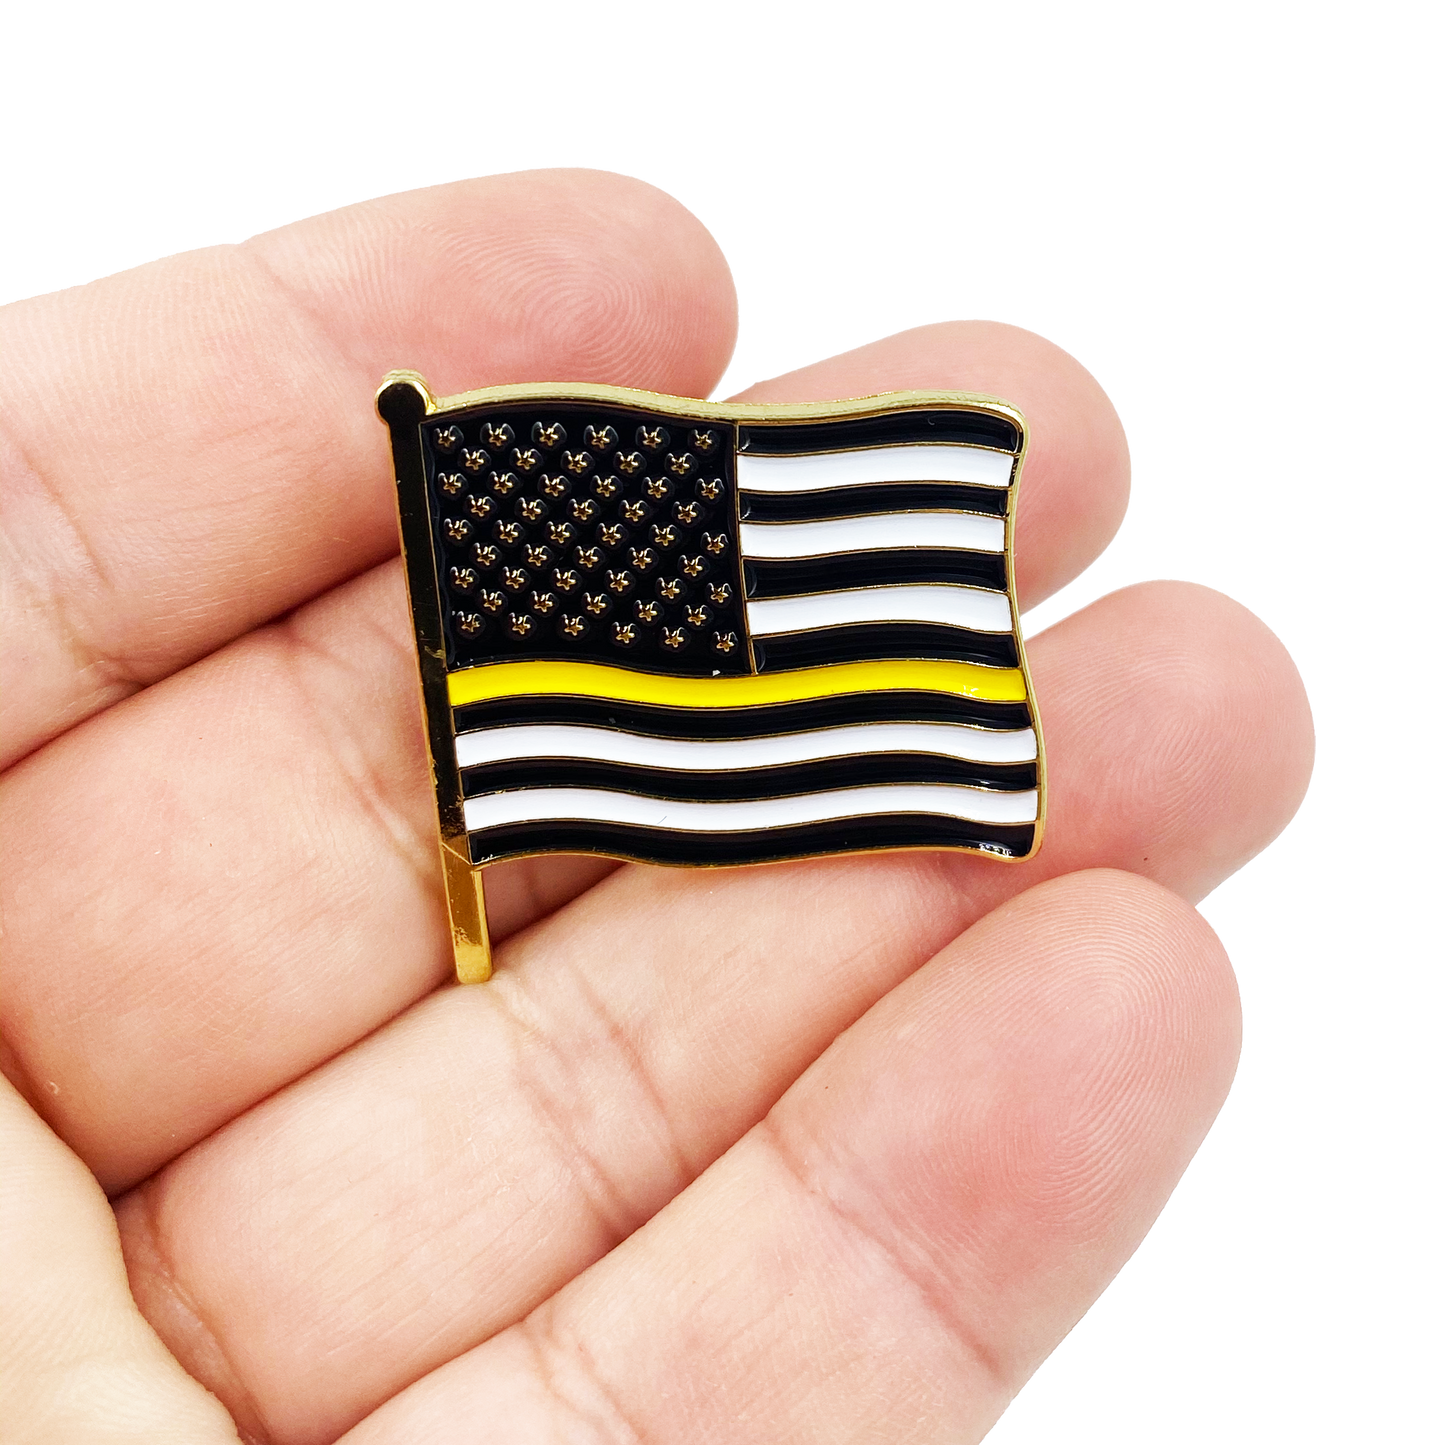 Dispatcher Thin Gold Line American Waving Flag Lapel Pin 1.25" with 2 pin posts and deluxe clasps, U.S. Stars are Stripes, Old Glory US USA Yellow 911 Emergency